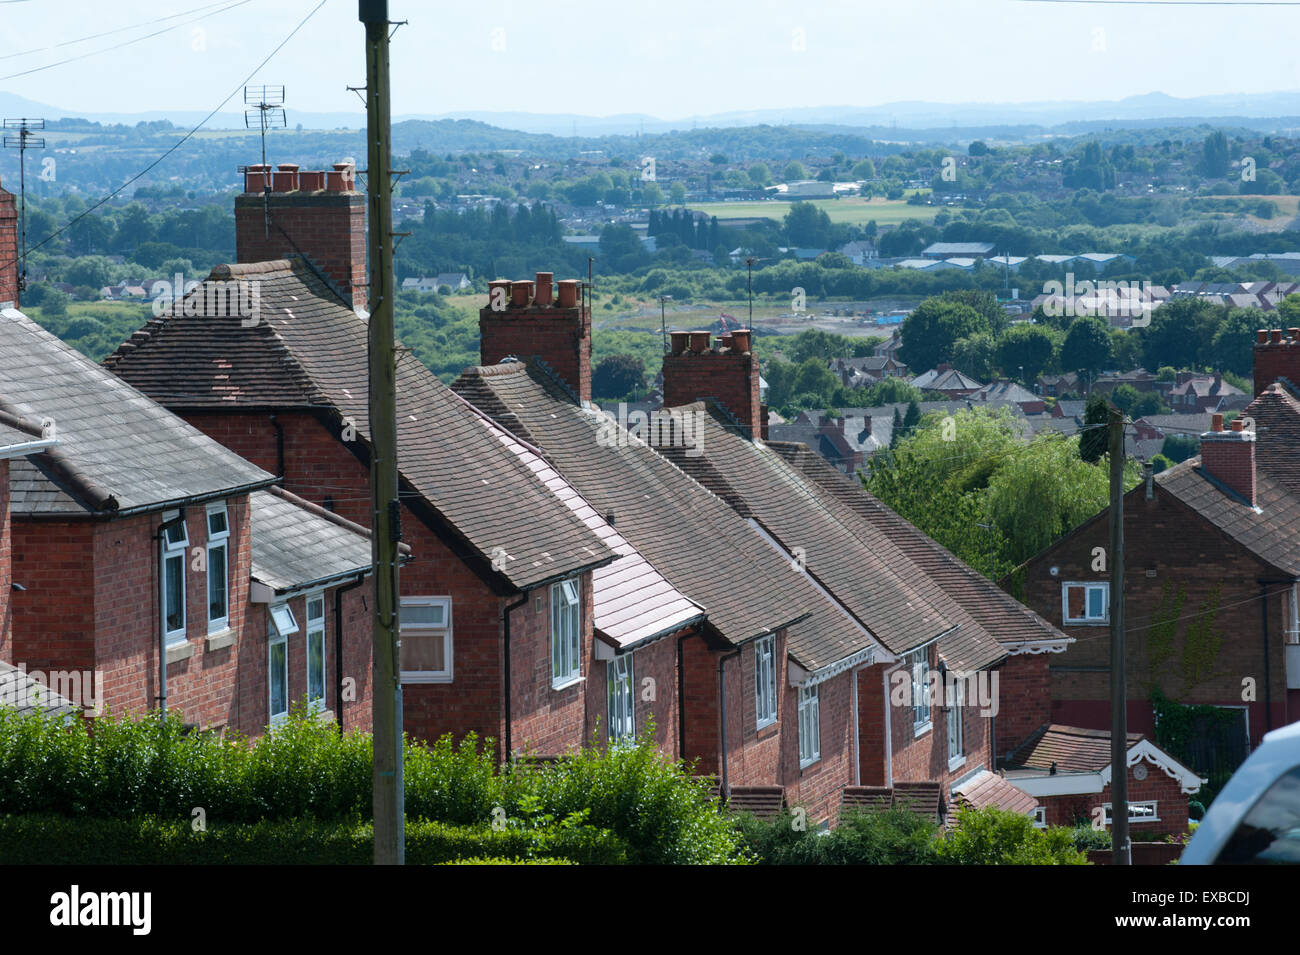 View of roof tops and privet hedges in a traditional English council housing estate in Dudley with views out across countryside Stock Photo